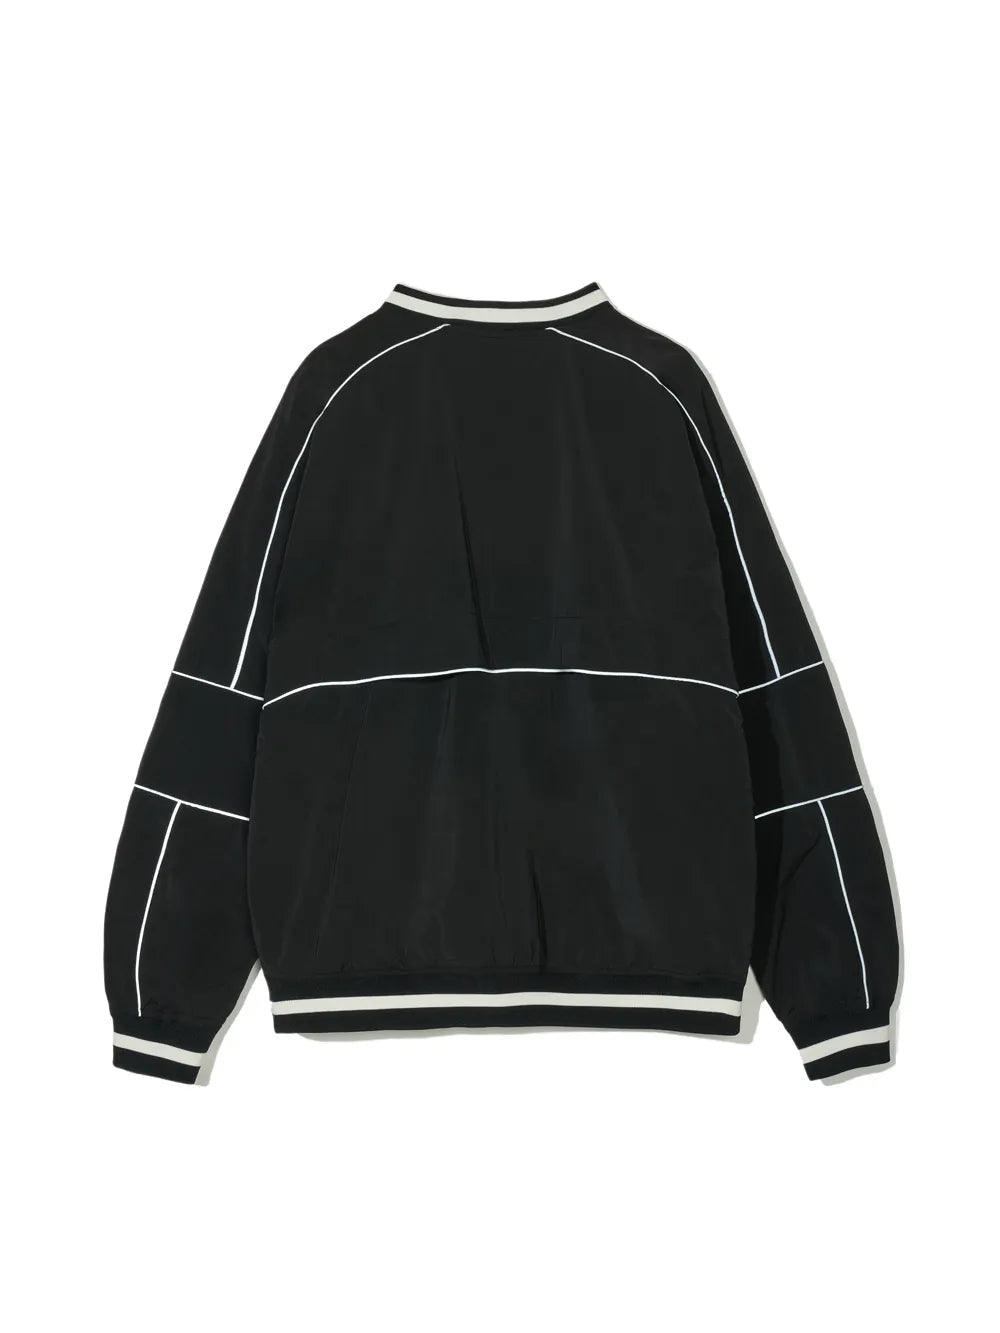 Partimento Reflective Piping Overfit Anorak - Black - Tops